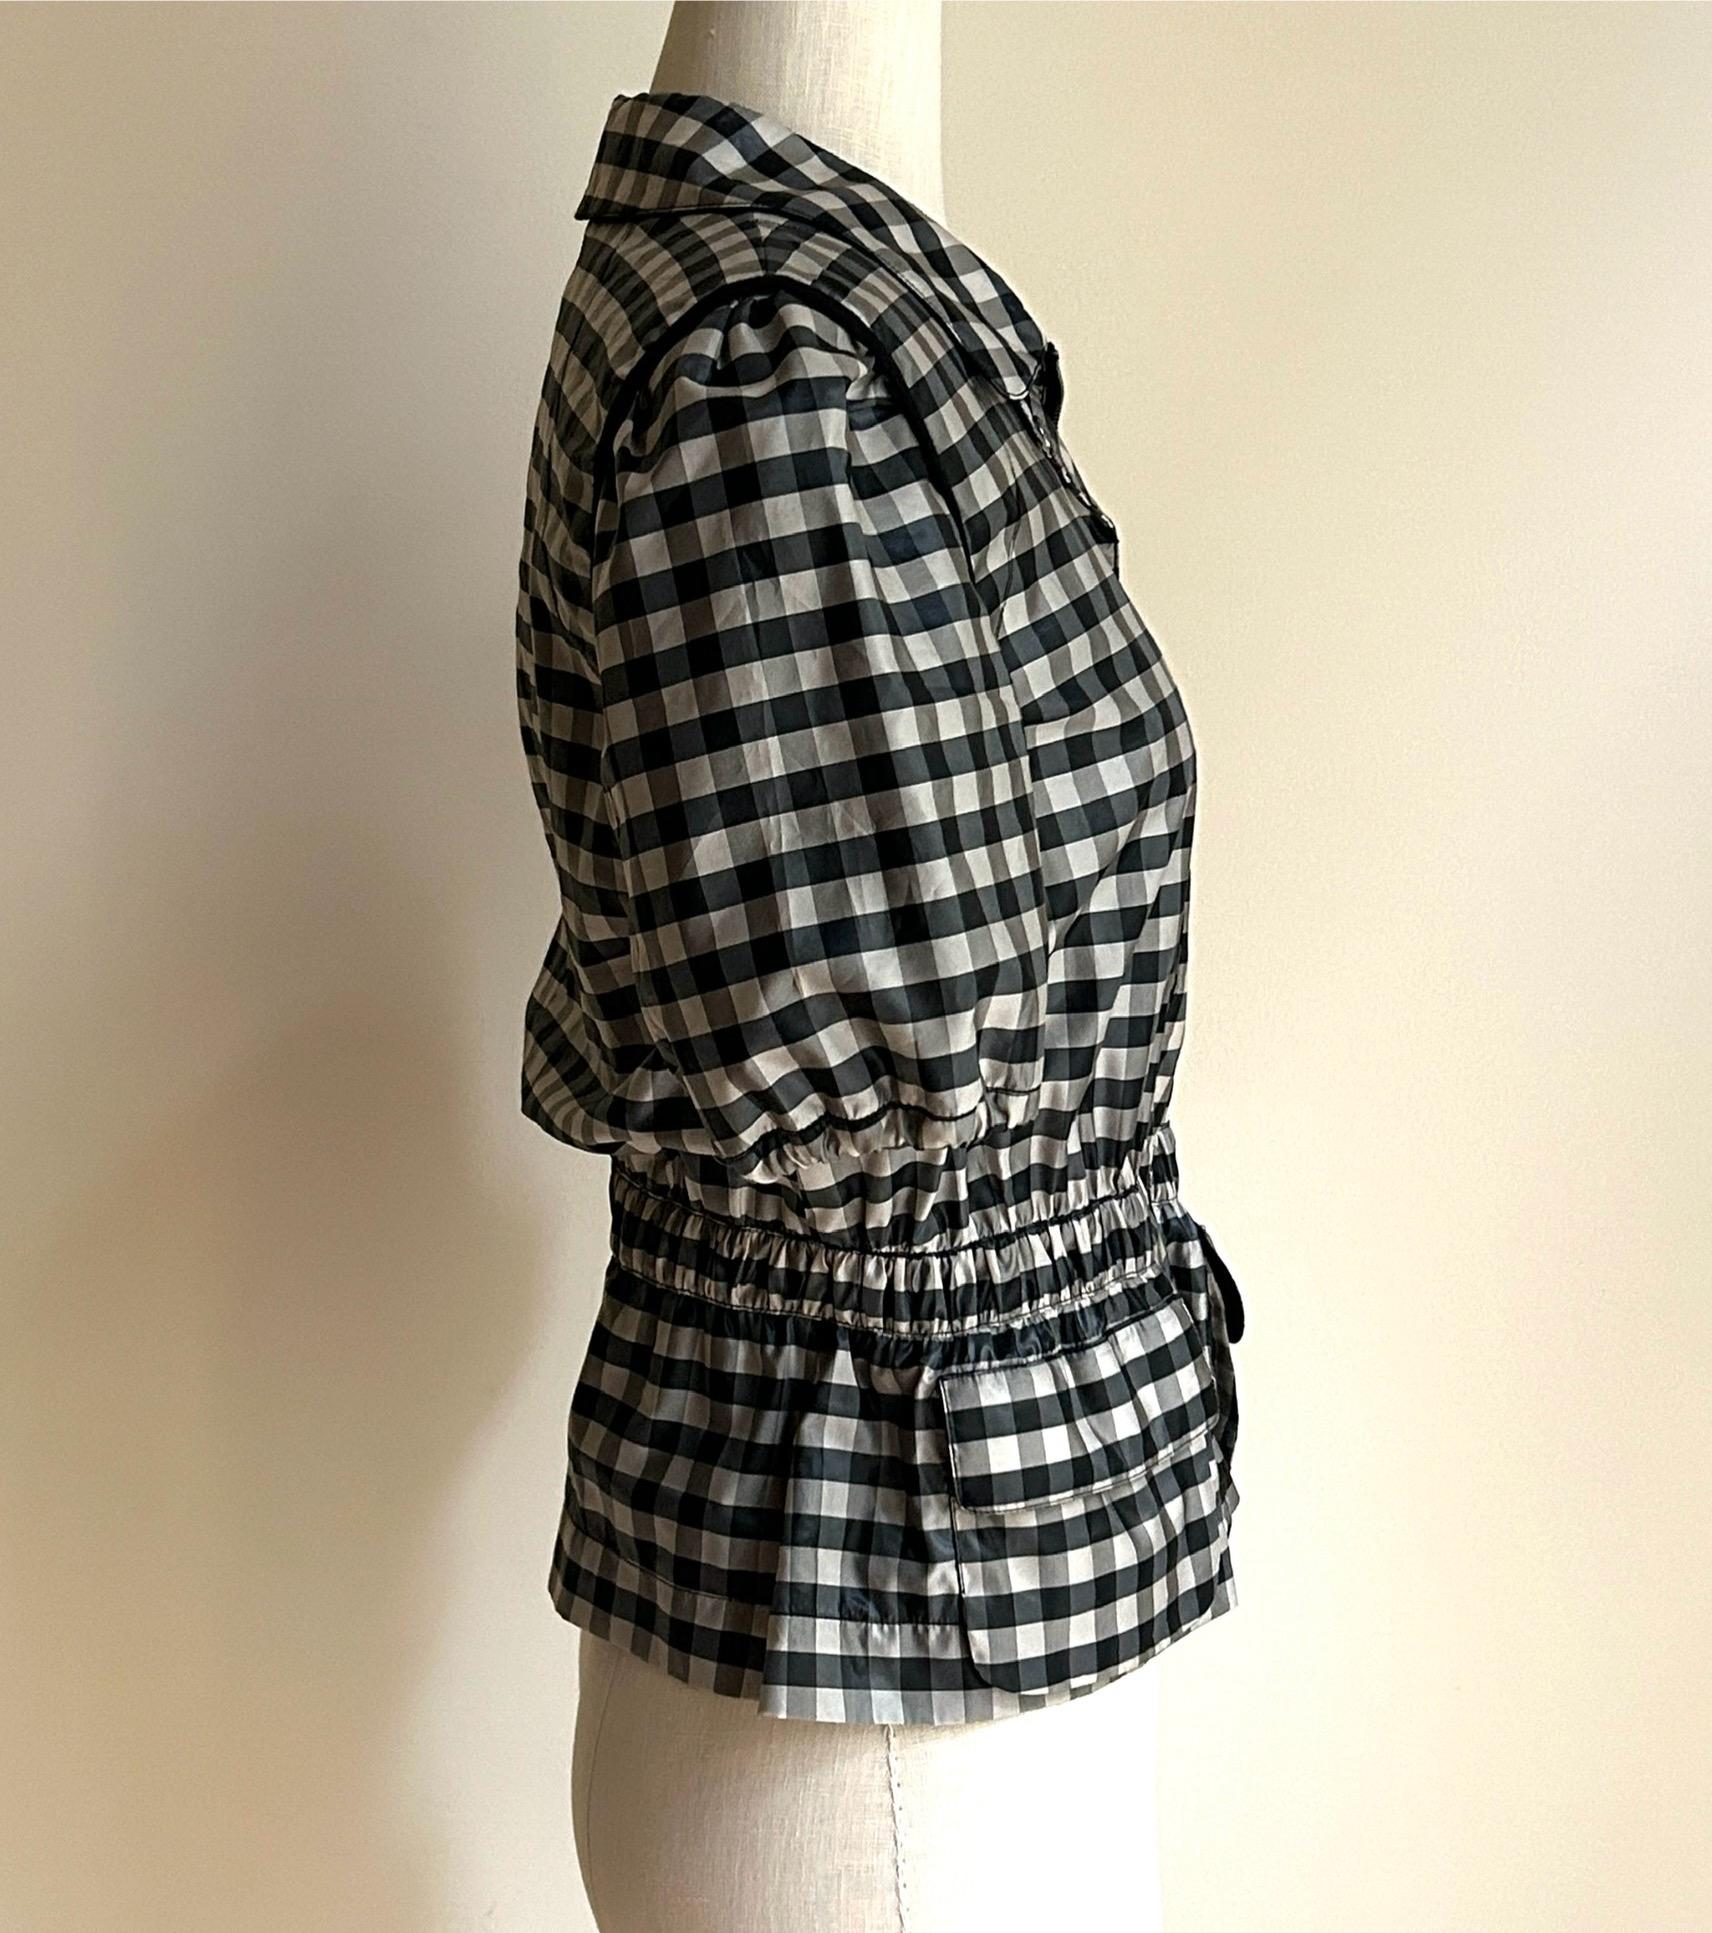 Armani Collezioni Grey and Black Check Short Sleeve Blazer Jacket In Excellent Condition For Sale In San Francisco, CA